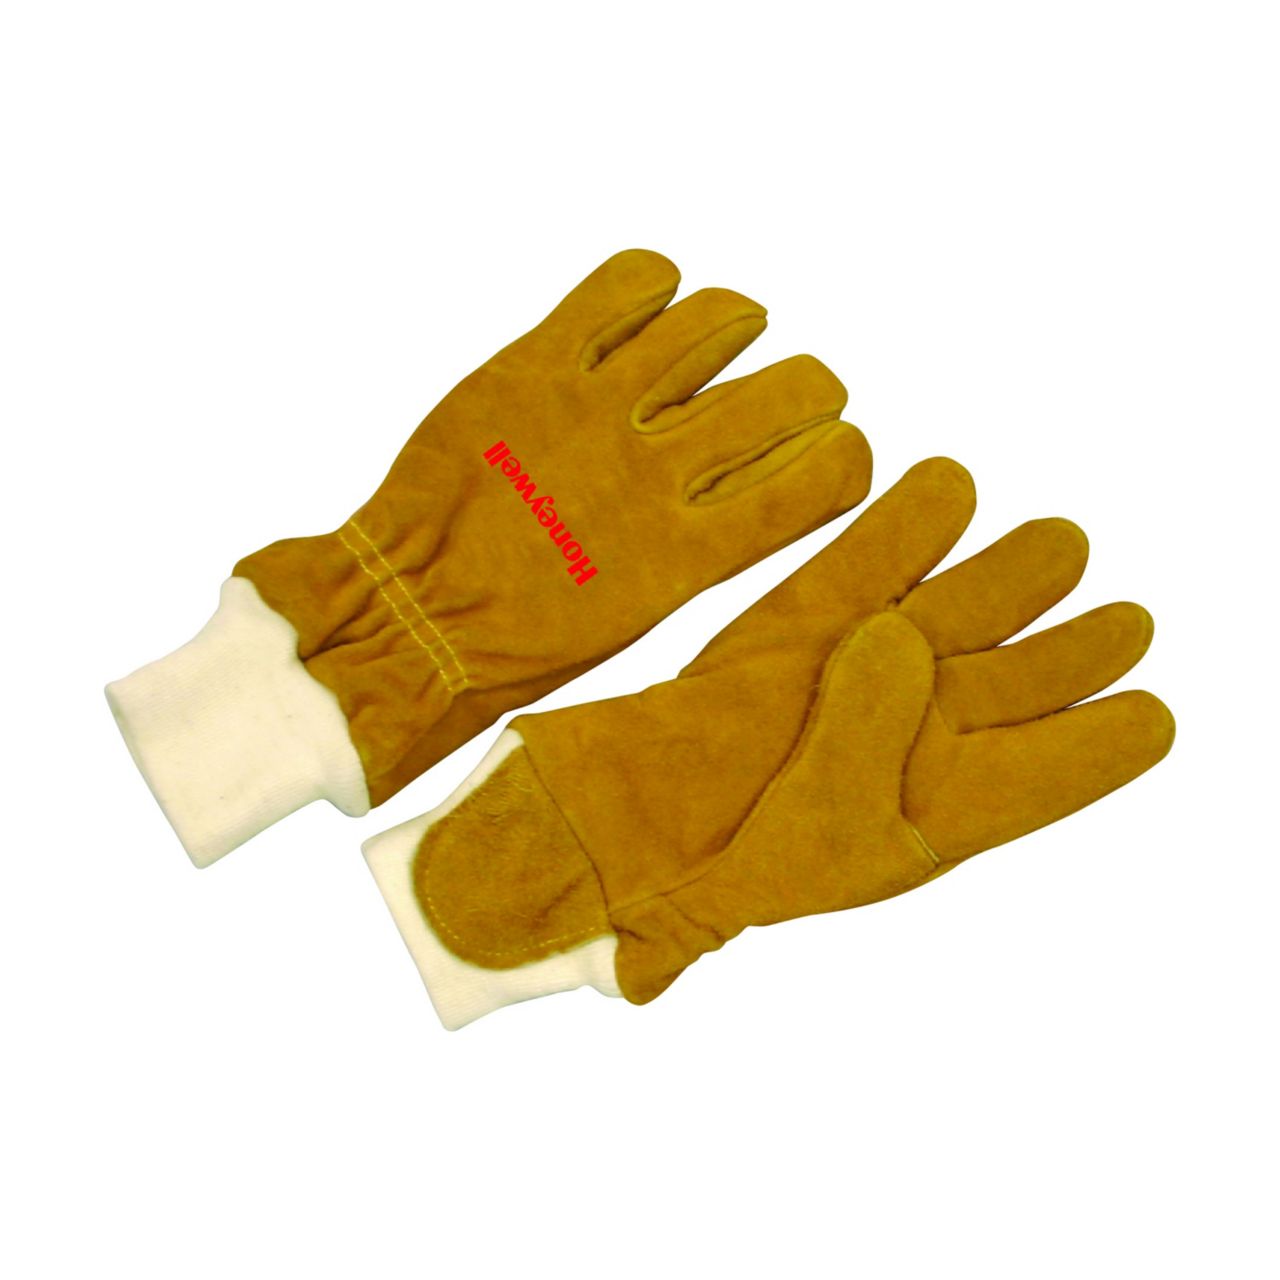 Honeywell Afw Cowhide- Poly Wristlet Safety Glove, Size M